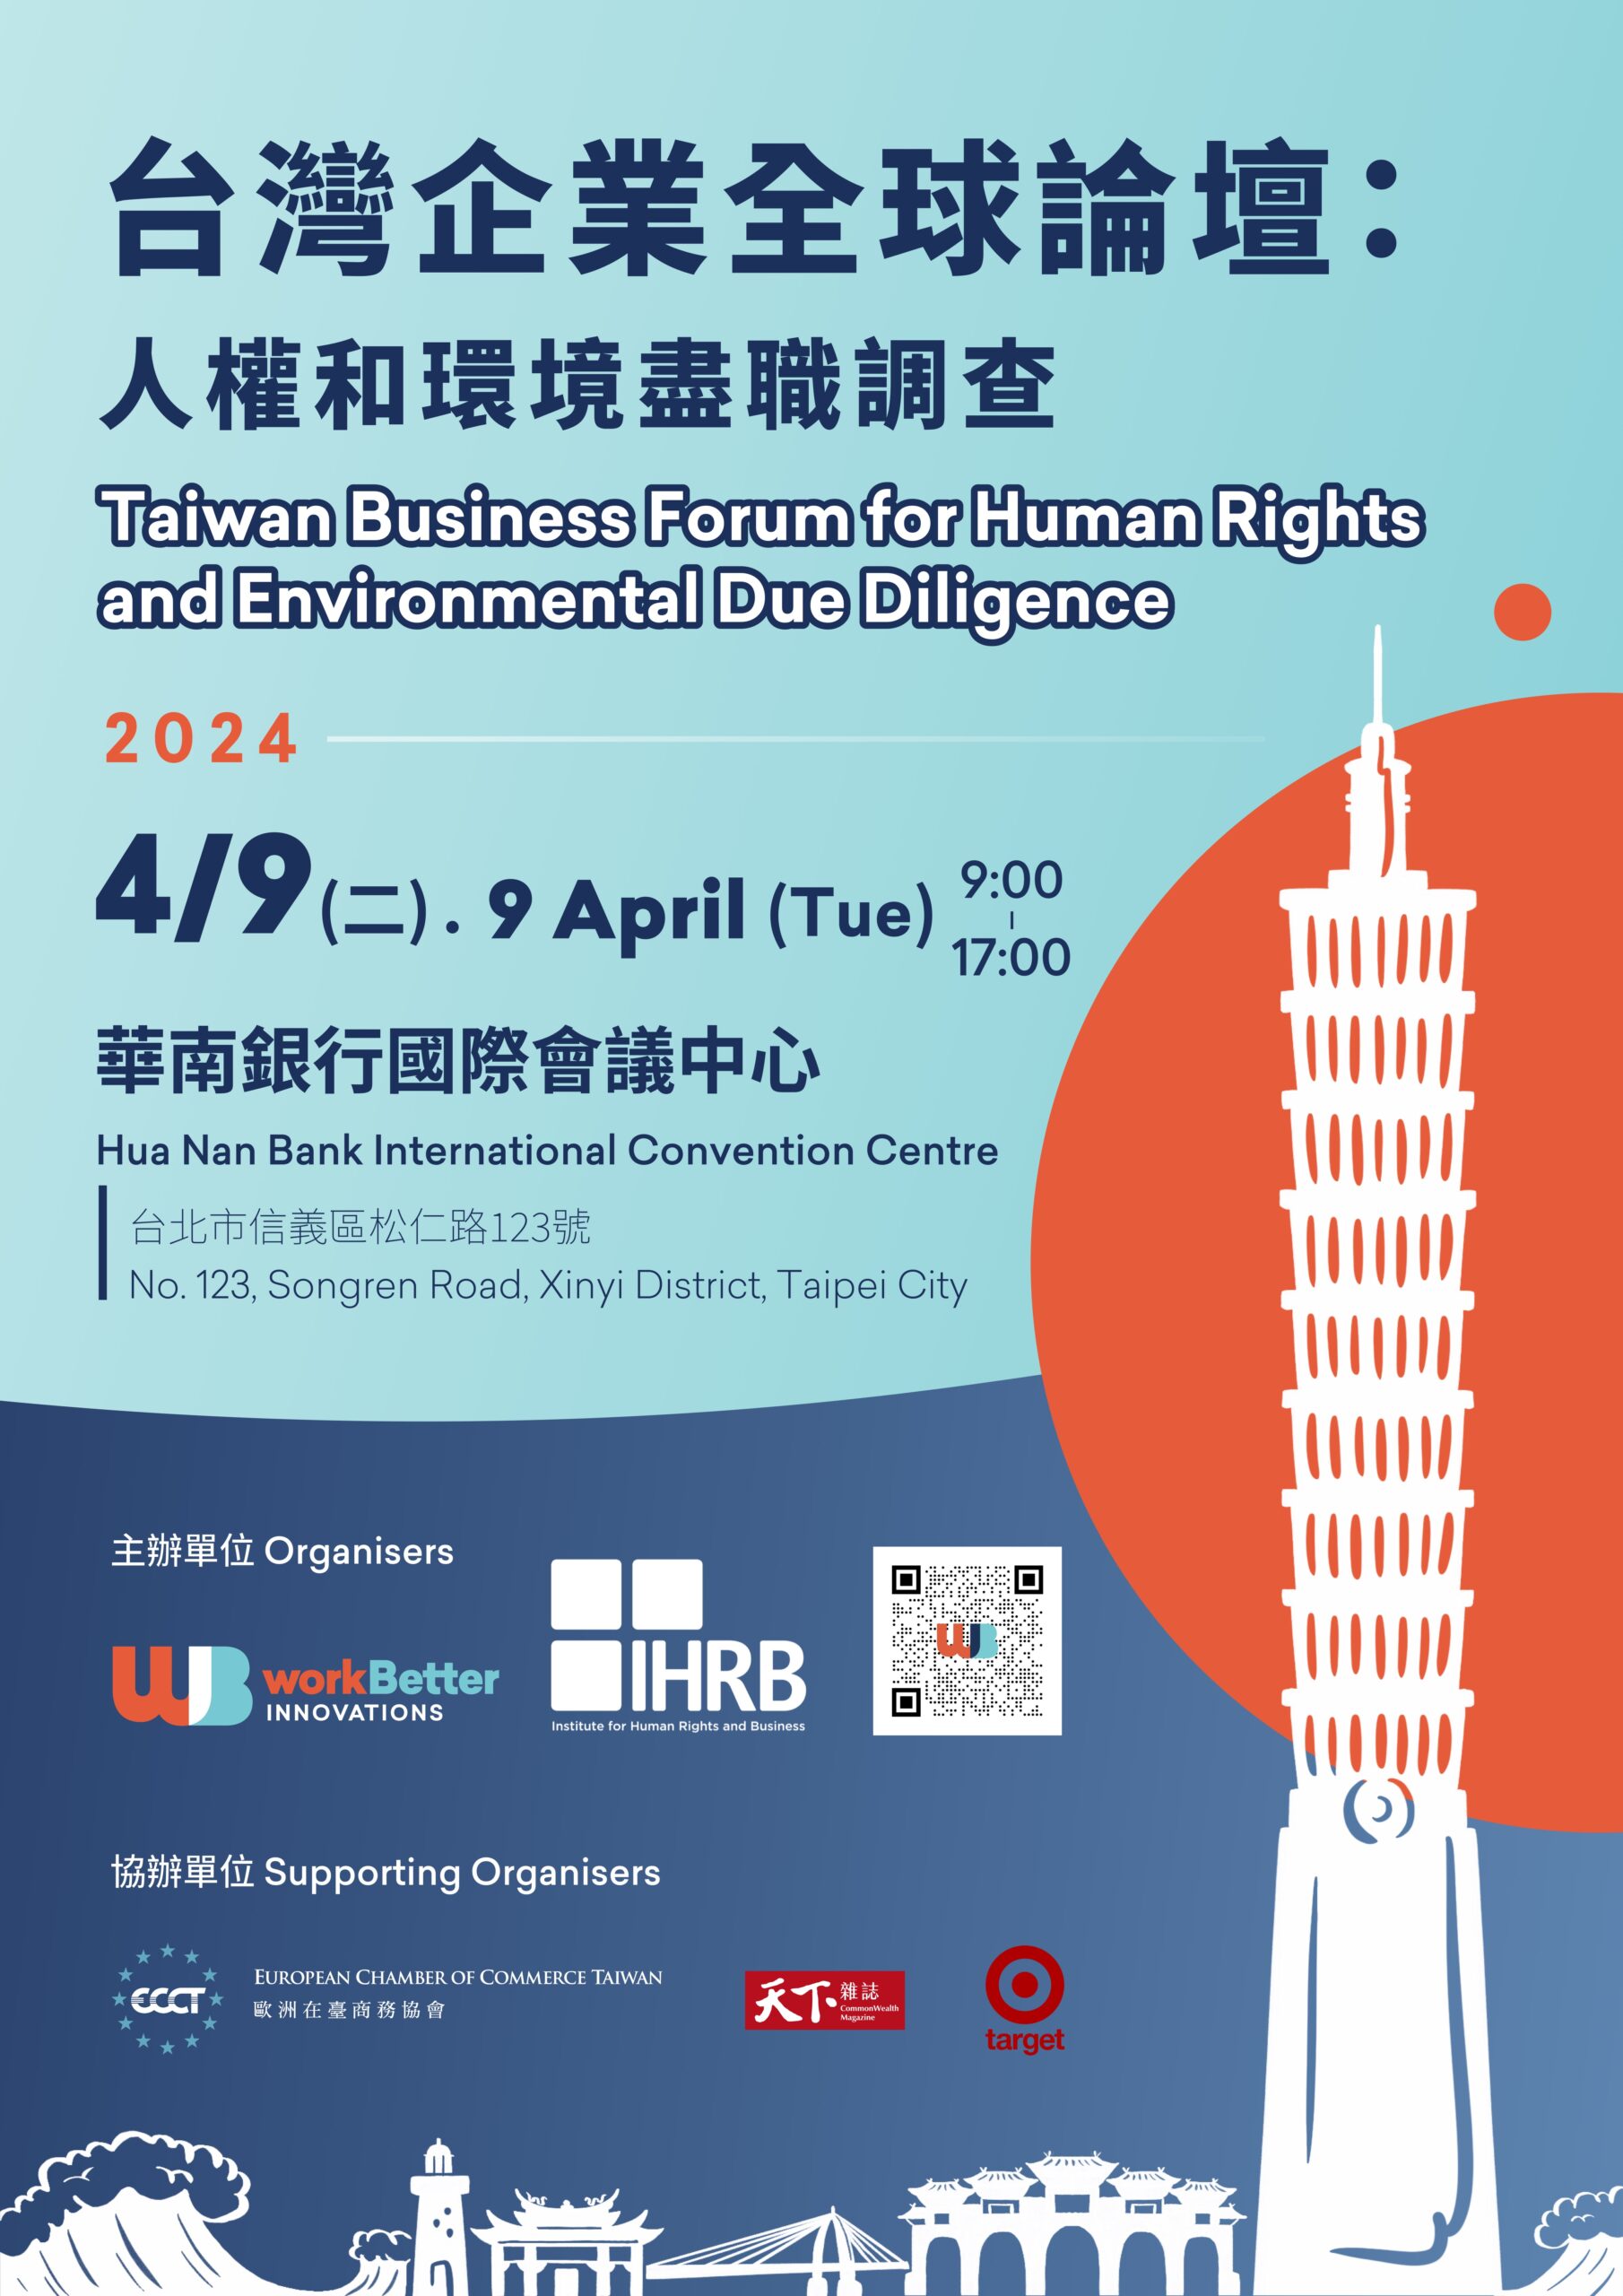 Taiwan Business Forum for Human Rights and Environmental Due Diligence